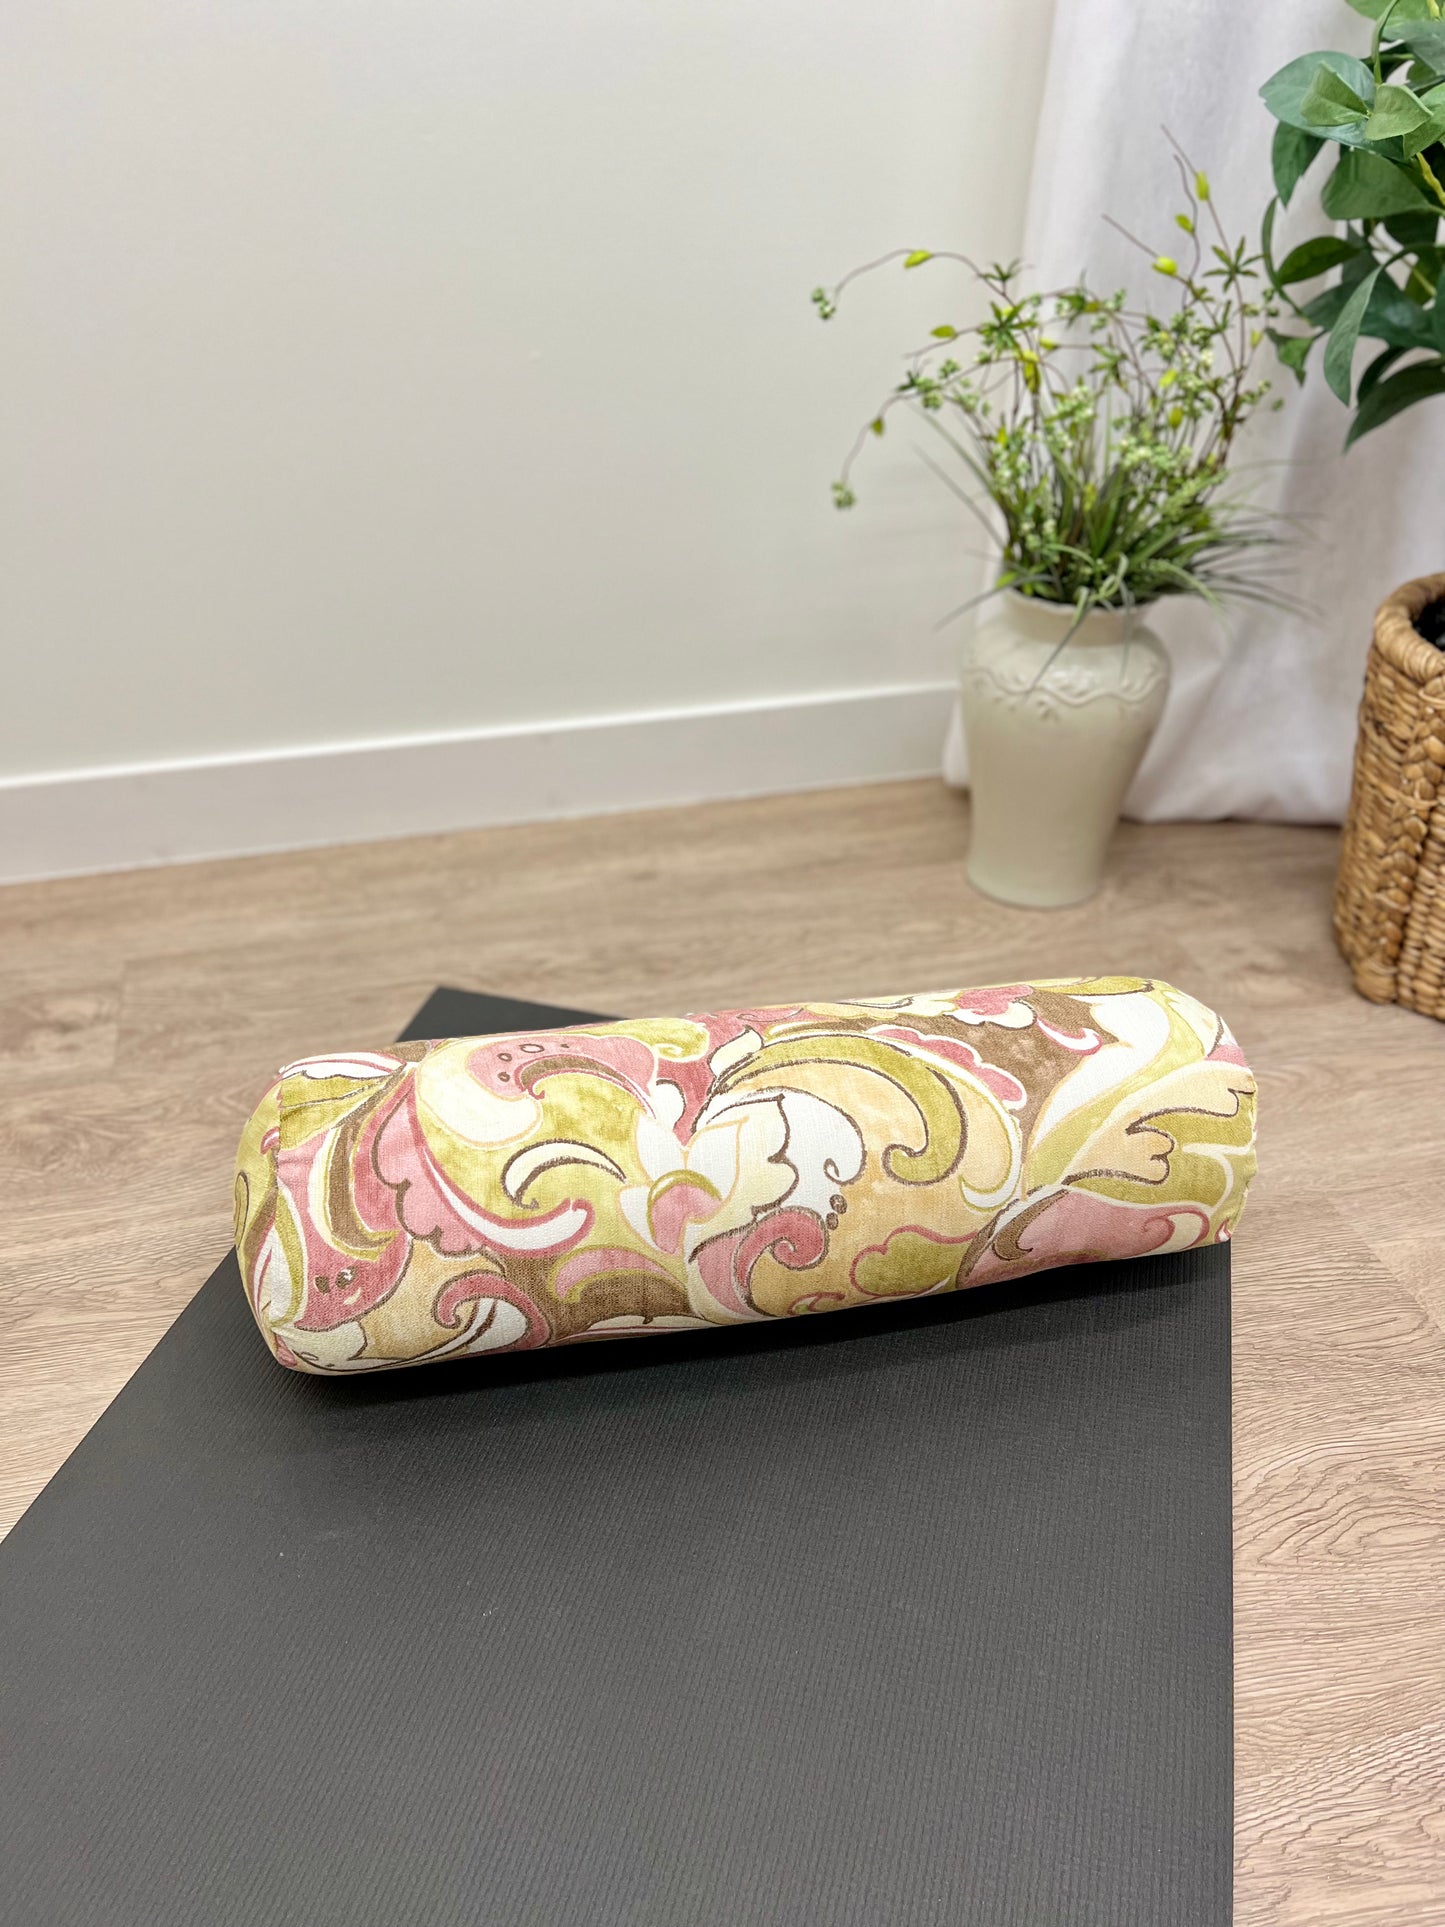 Round Yoga Bolster, Made in Canada by My Yoga Room Elements. Soft Coloured Swirl Print Fabric for yoga practice